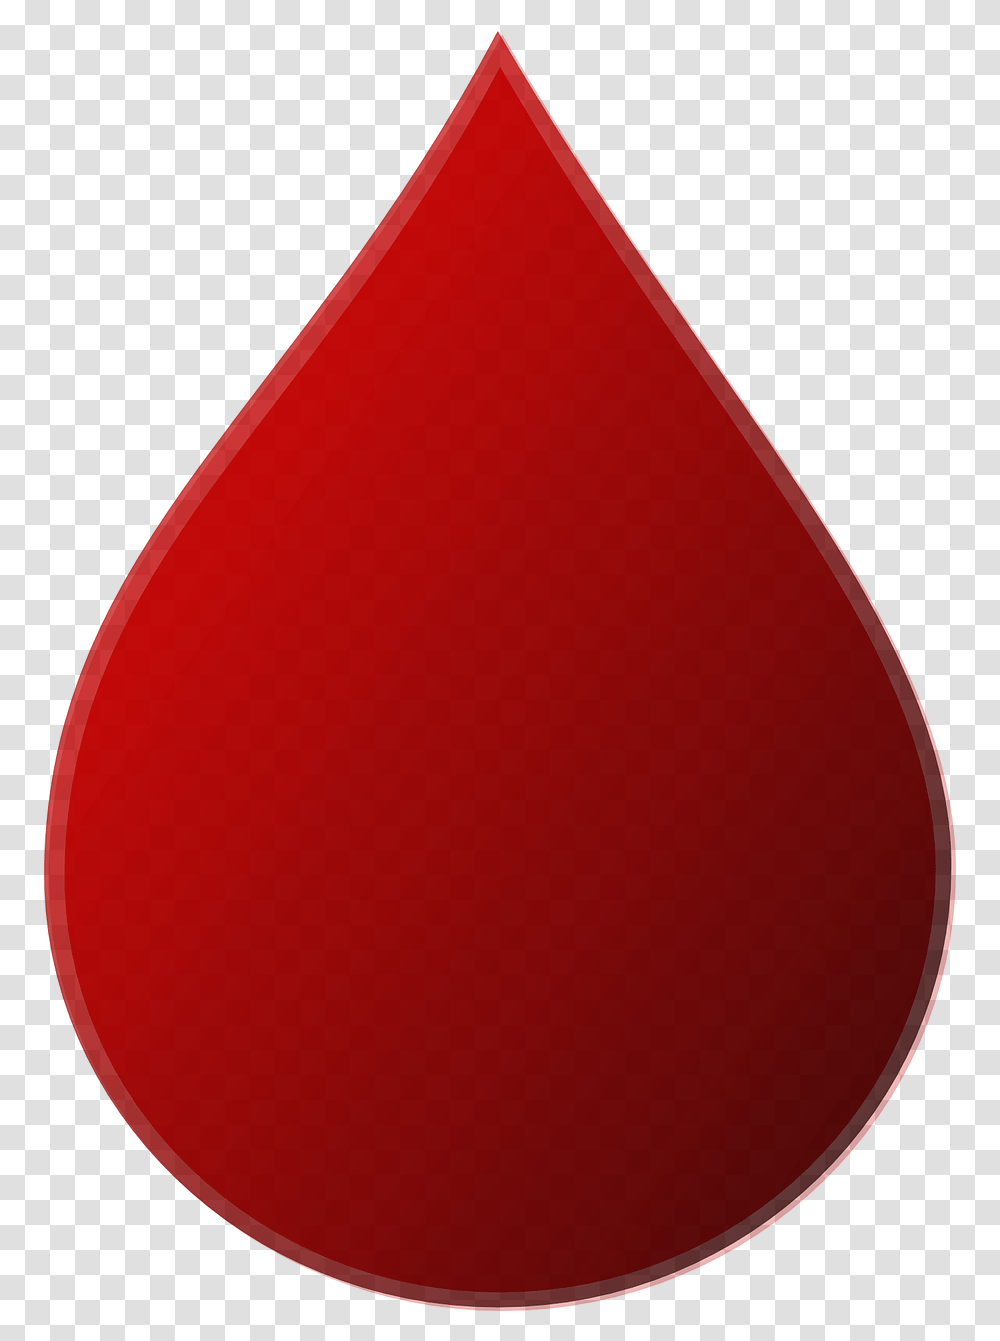 Water Drop Red Red Water Drop, Balloon, Plant, Triangle, Droplet Transparent Png